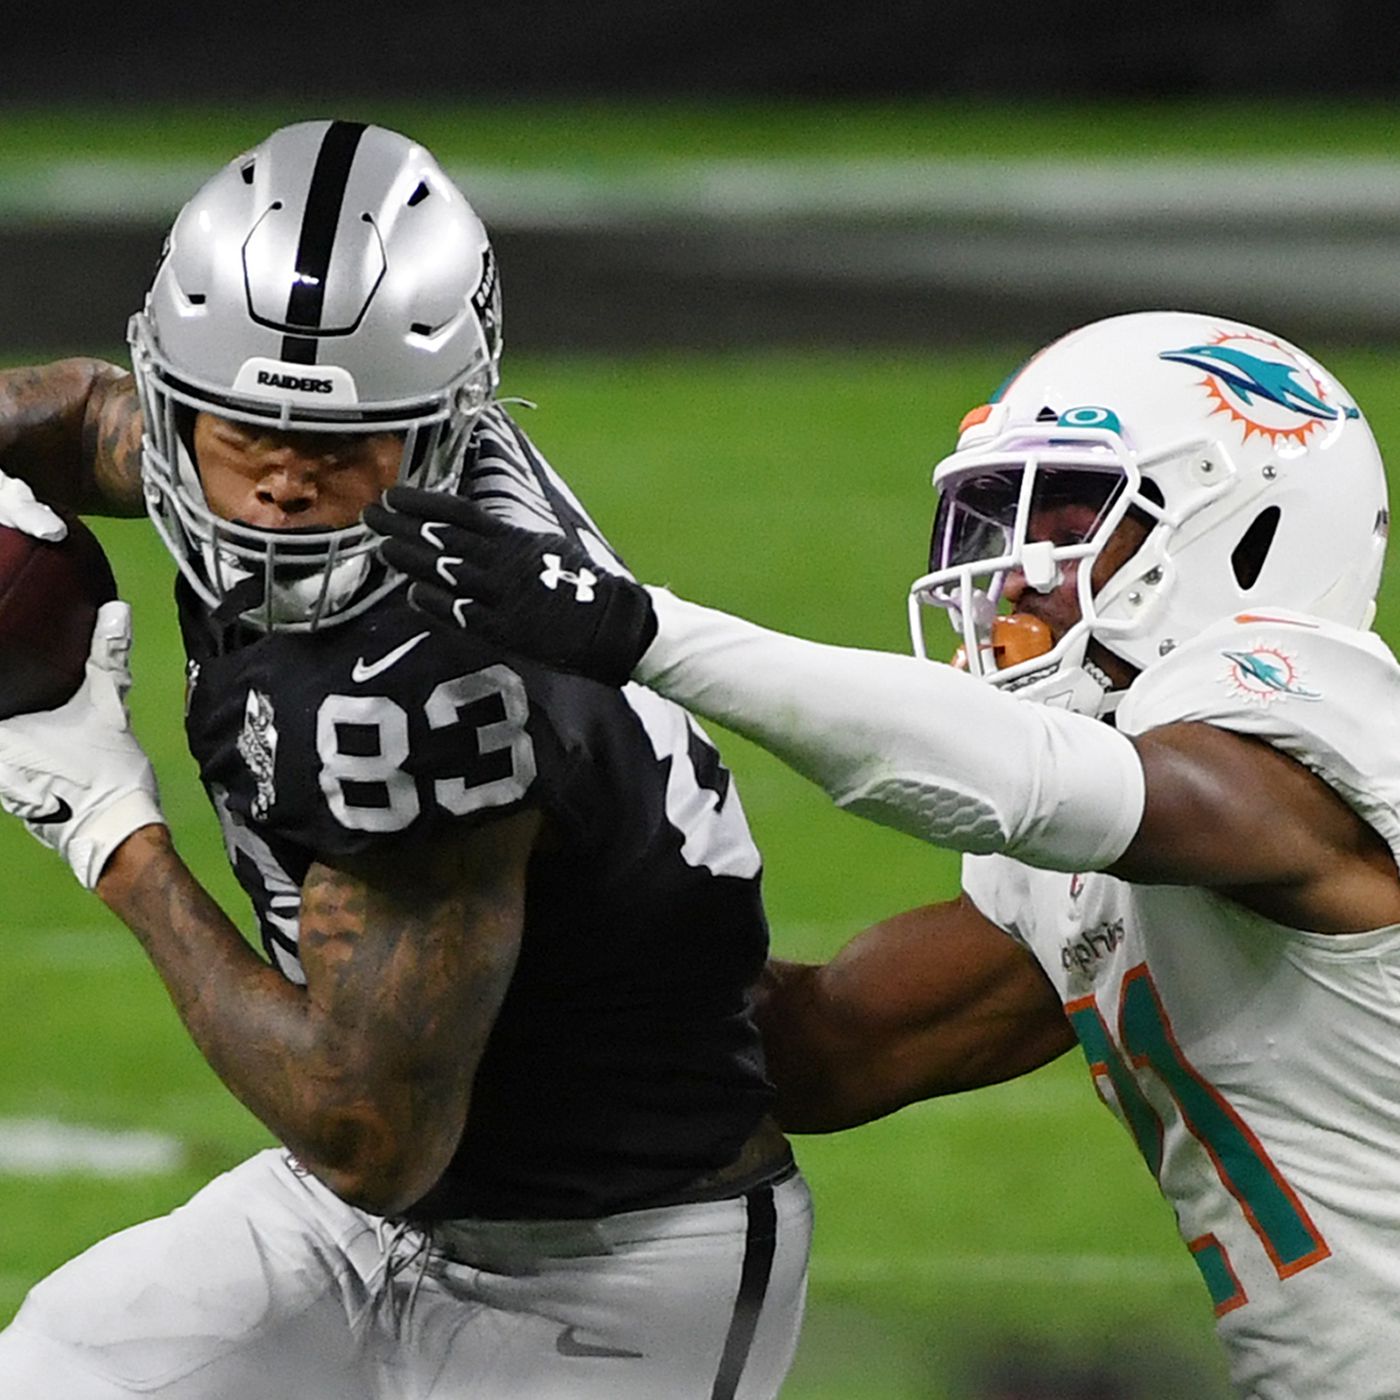 Dolphins vs Raiders 2021 Week 3 TV coverage - The Phinsider